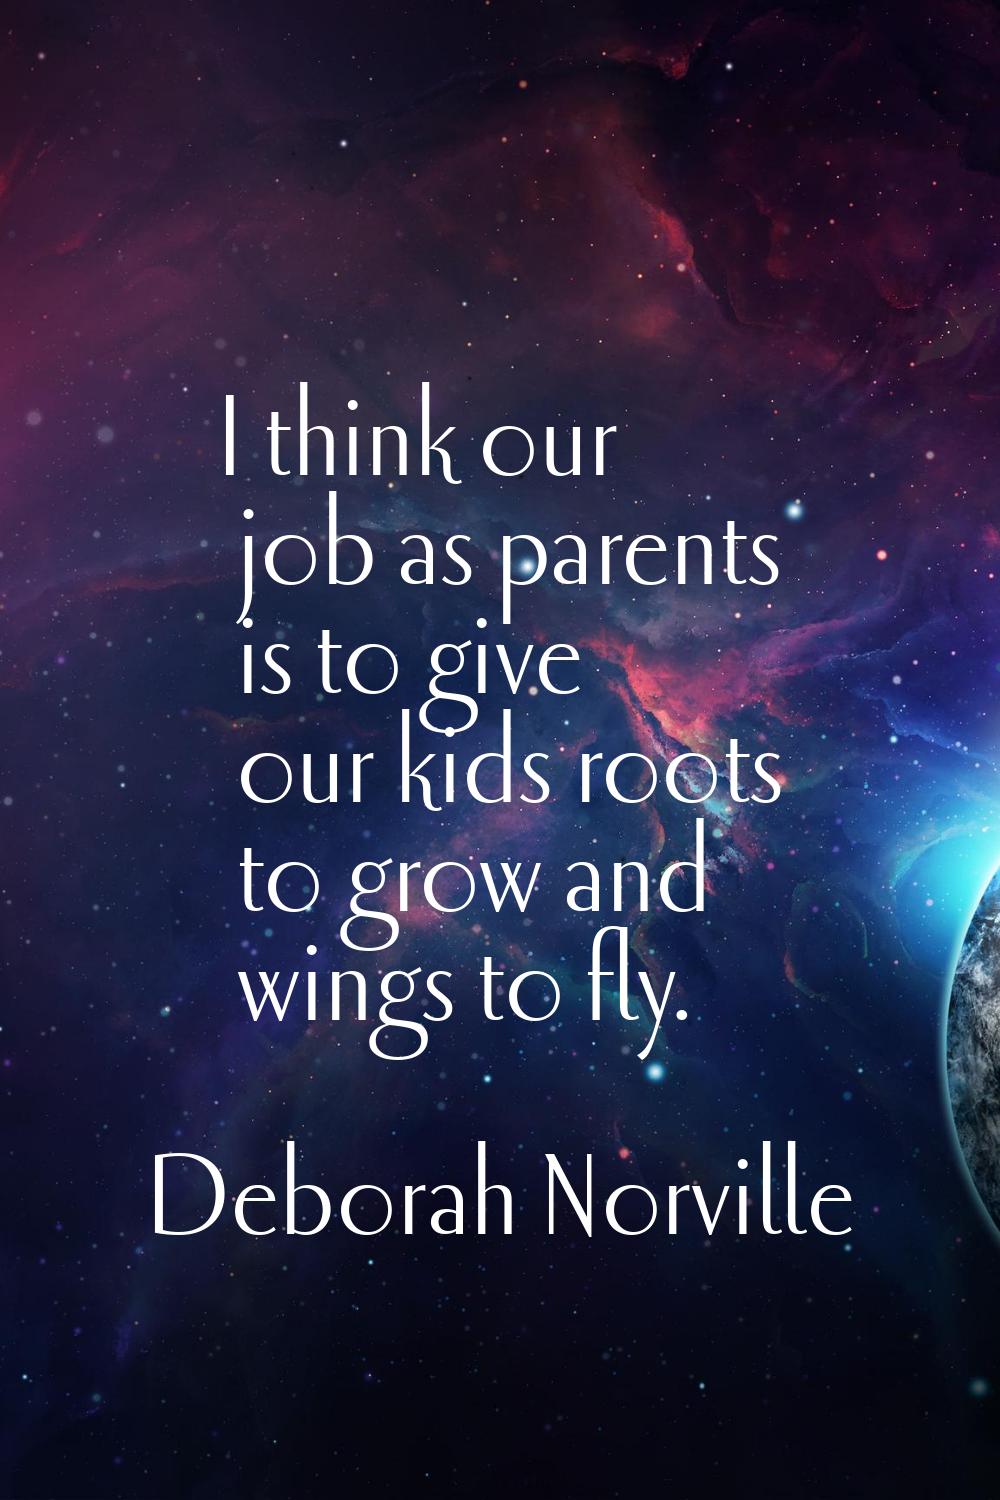 I think our job as parents is to give our kids roots to grow and wings to fly.